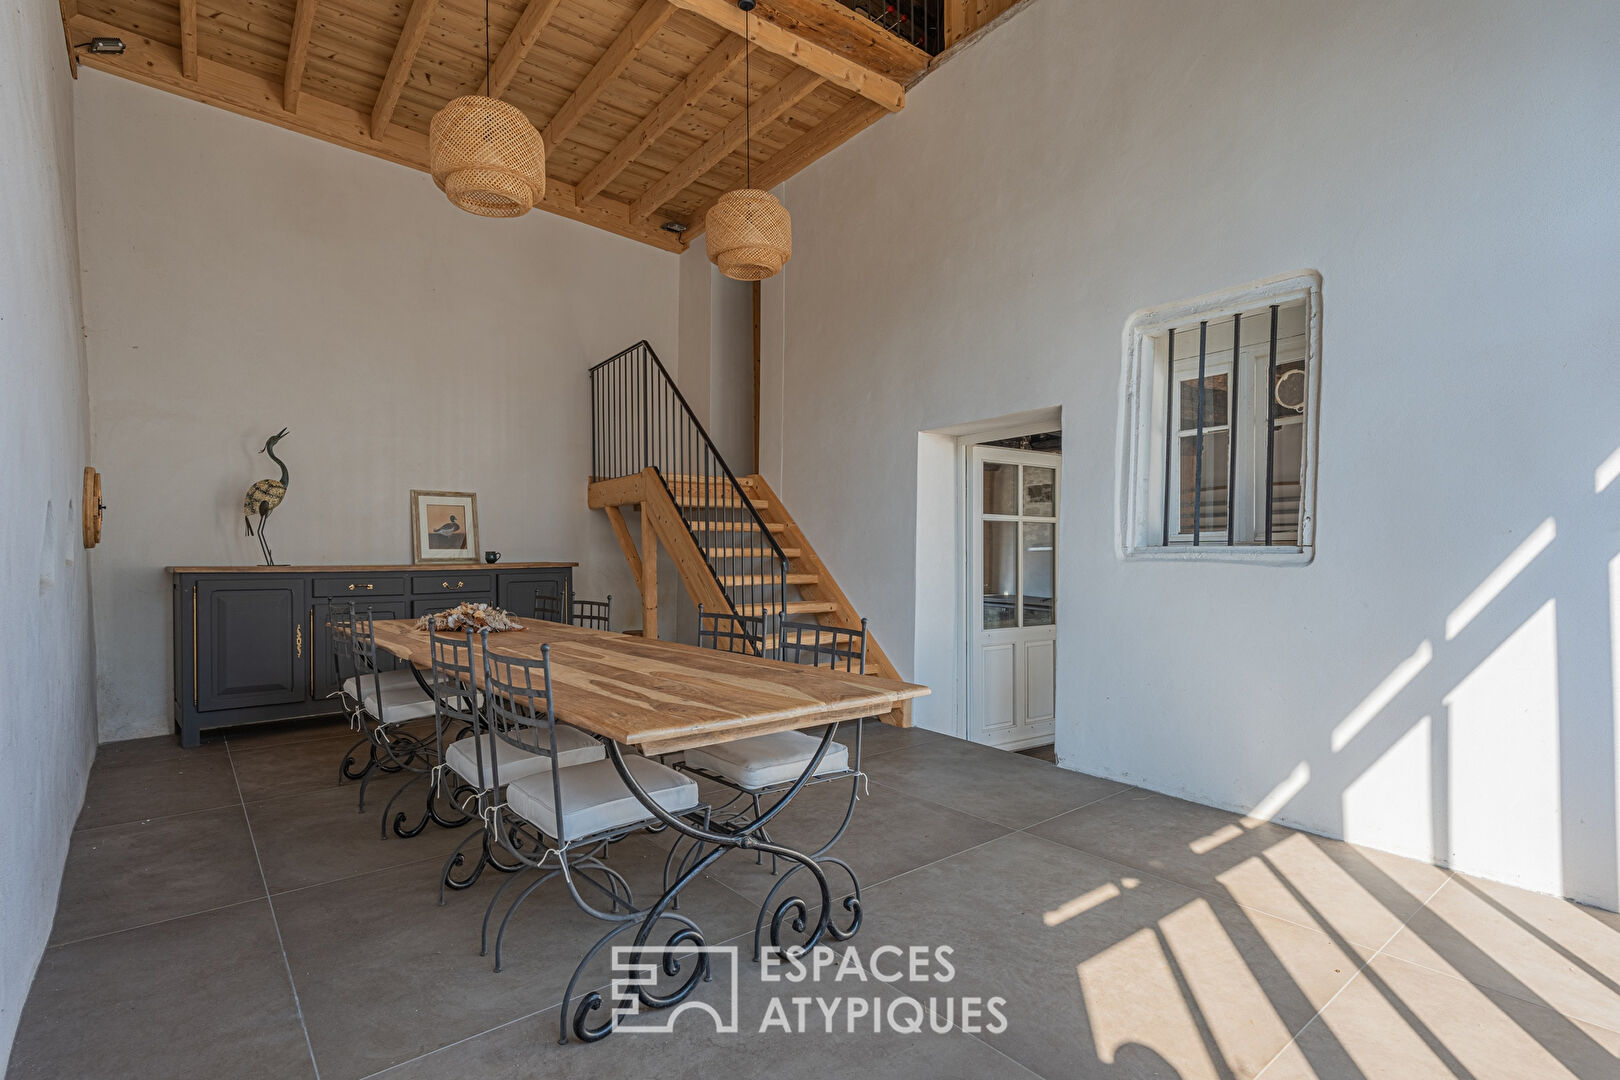 Renovated 1820 Dauphinoise house, swimming pool and charming outbuilding